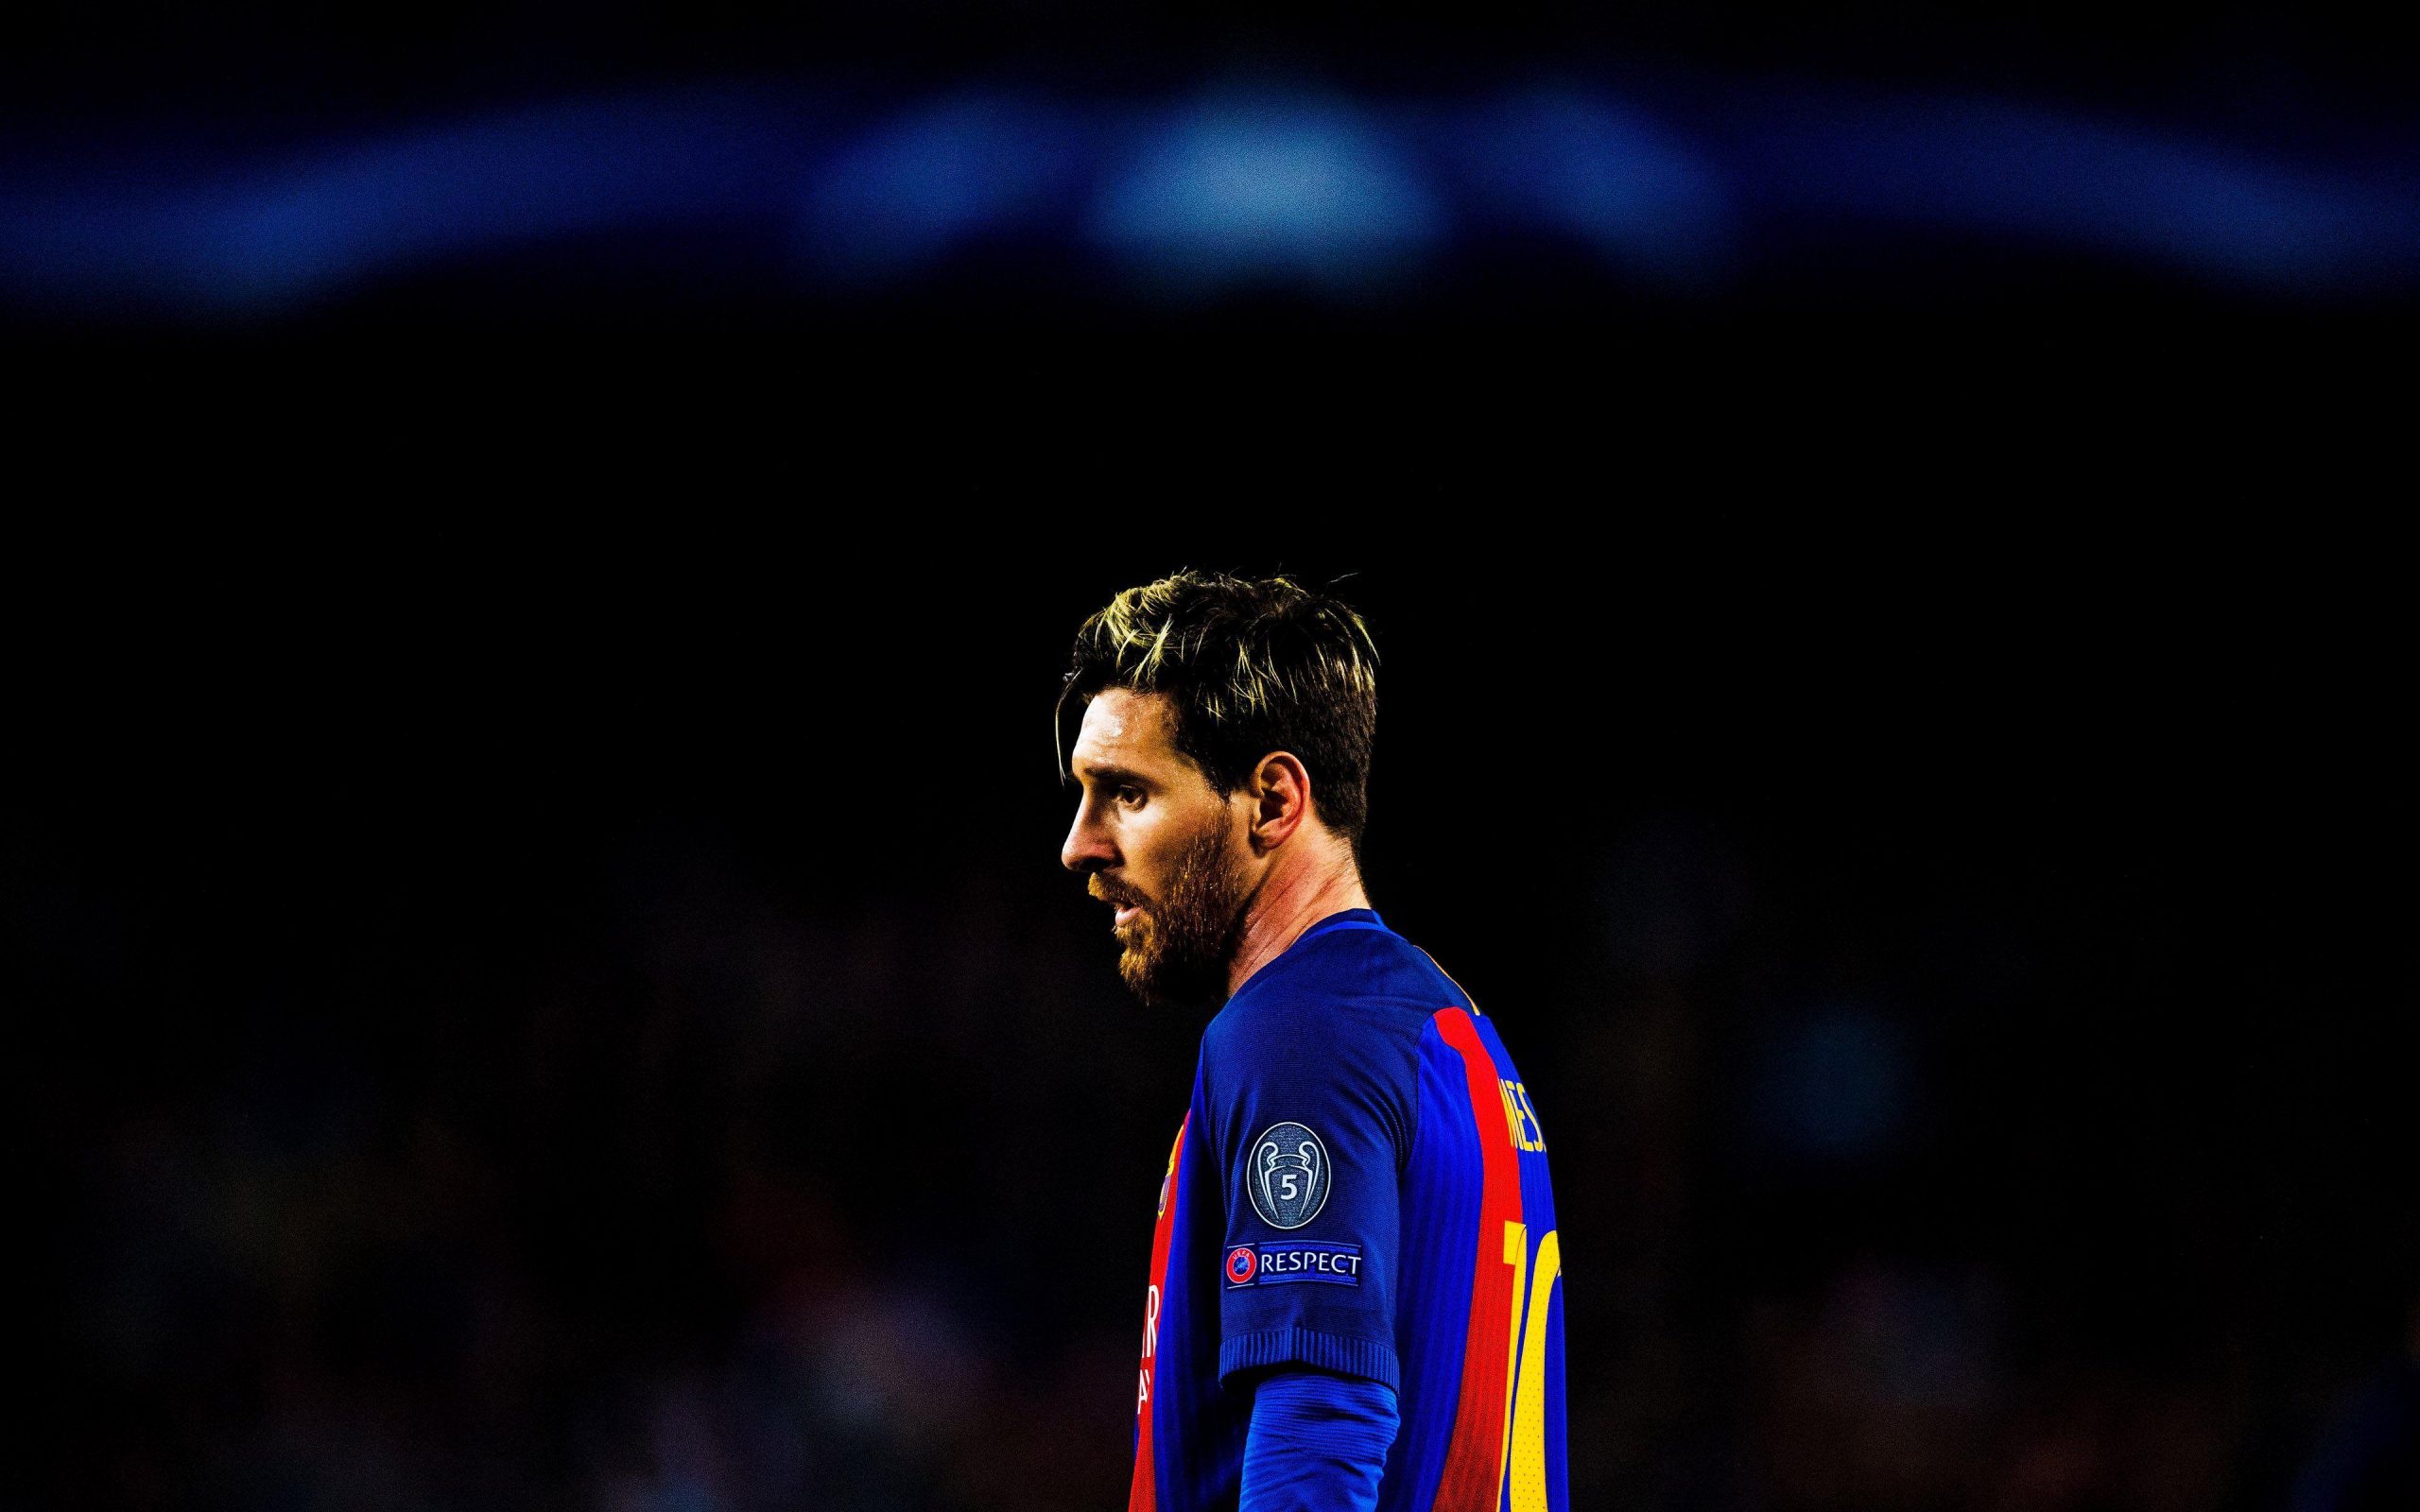 lionel messi wallpapers hd 4k 2